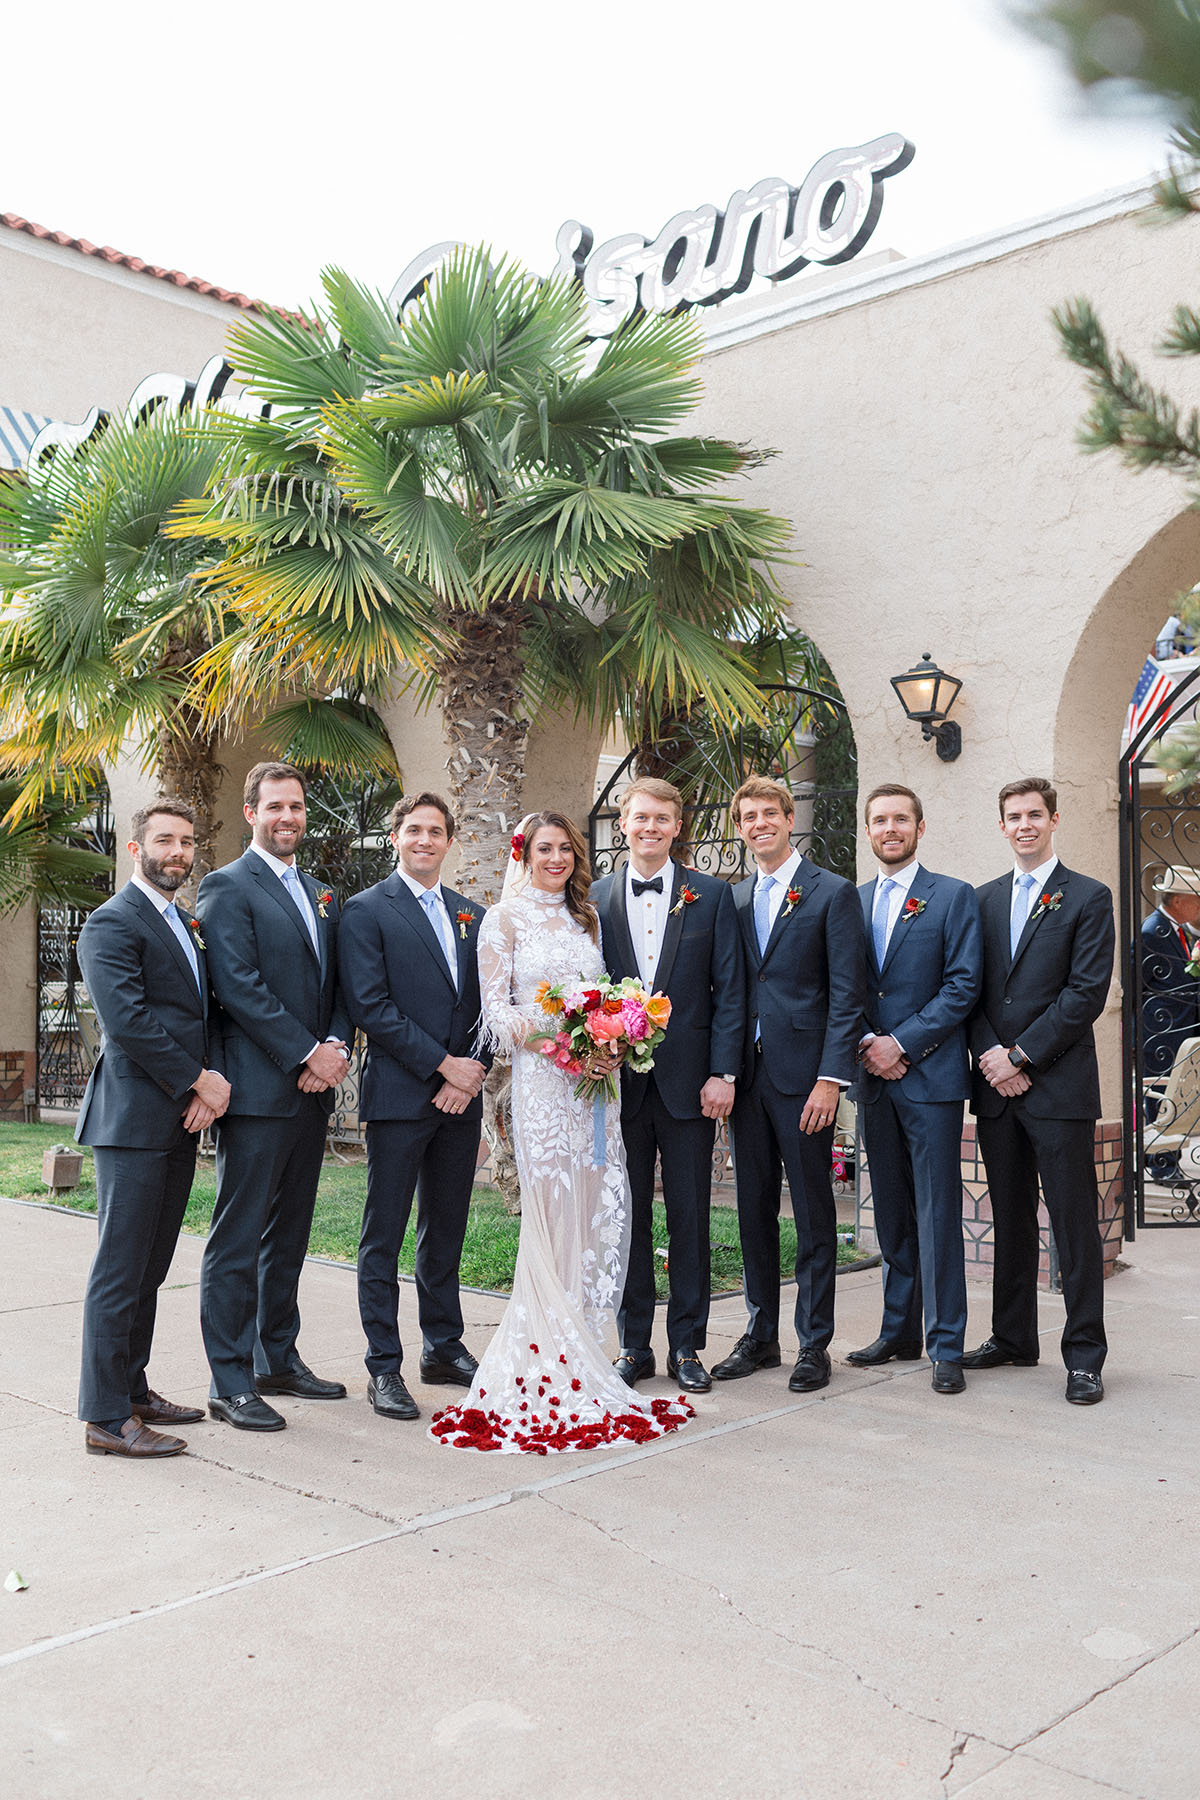 Shara & Bennet Grill and groomsmen